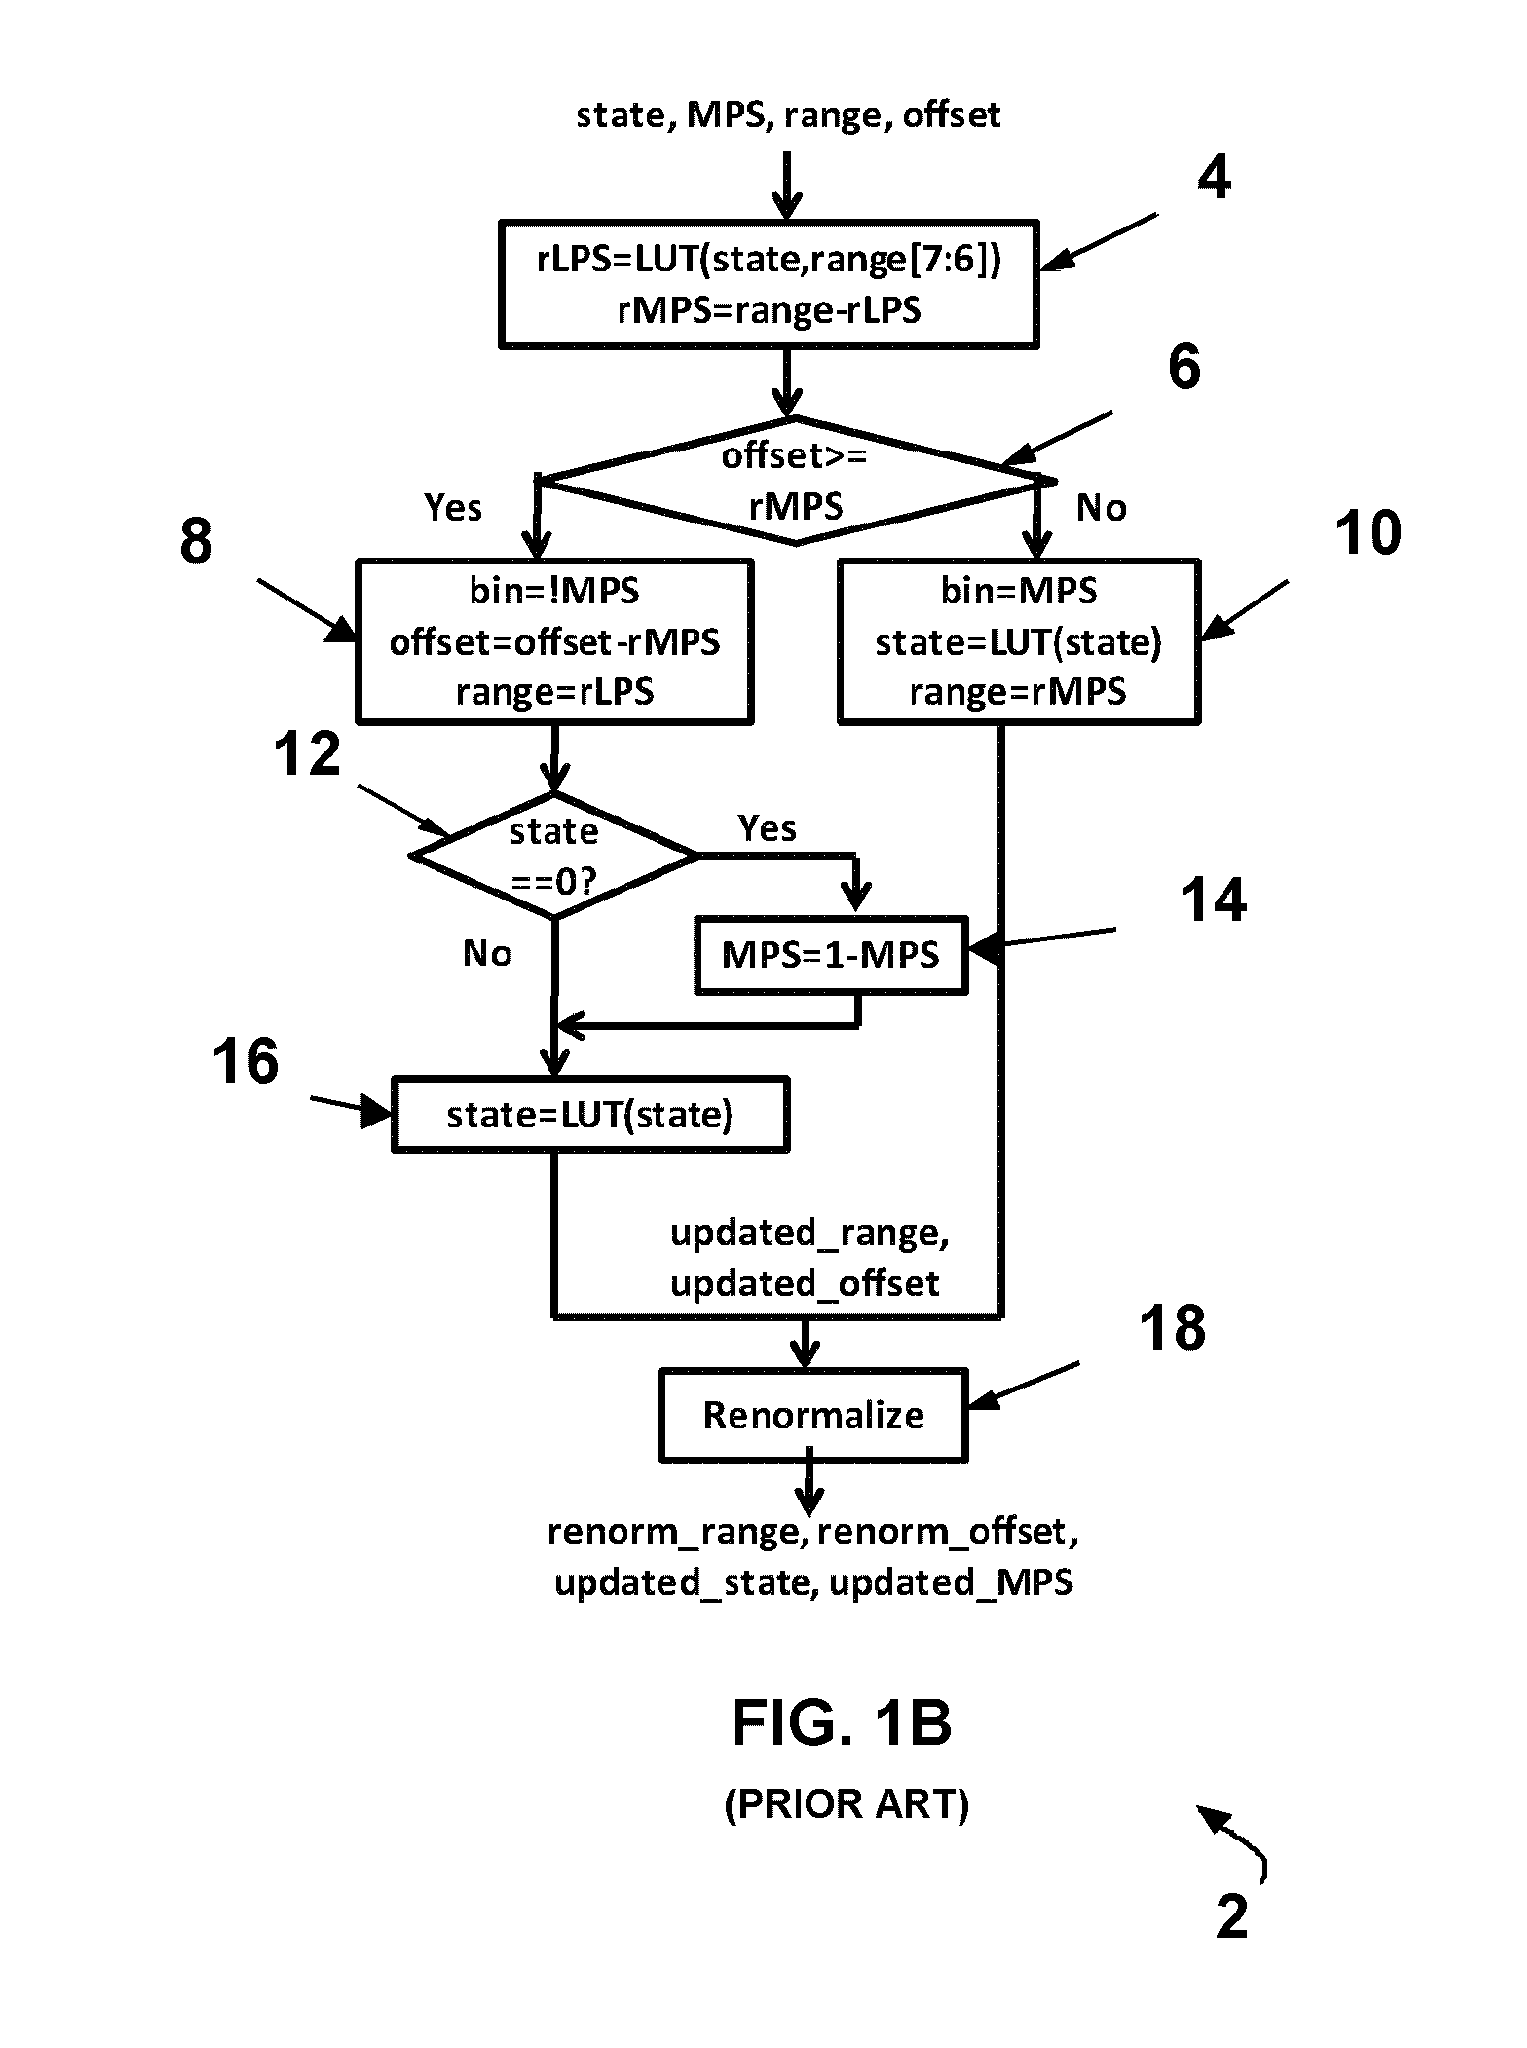 System and method for optimizing context-adaptive binary arithmetic coding